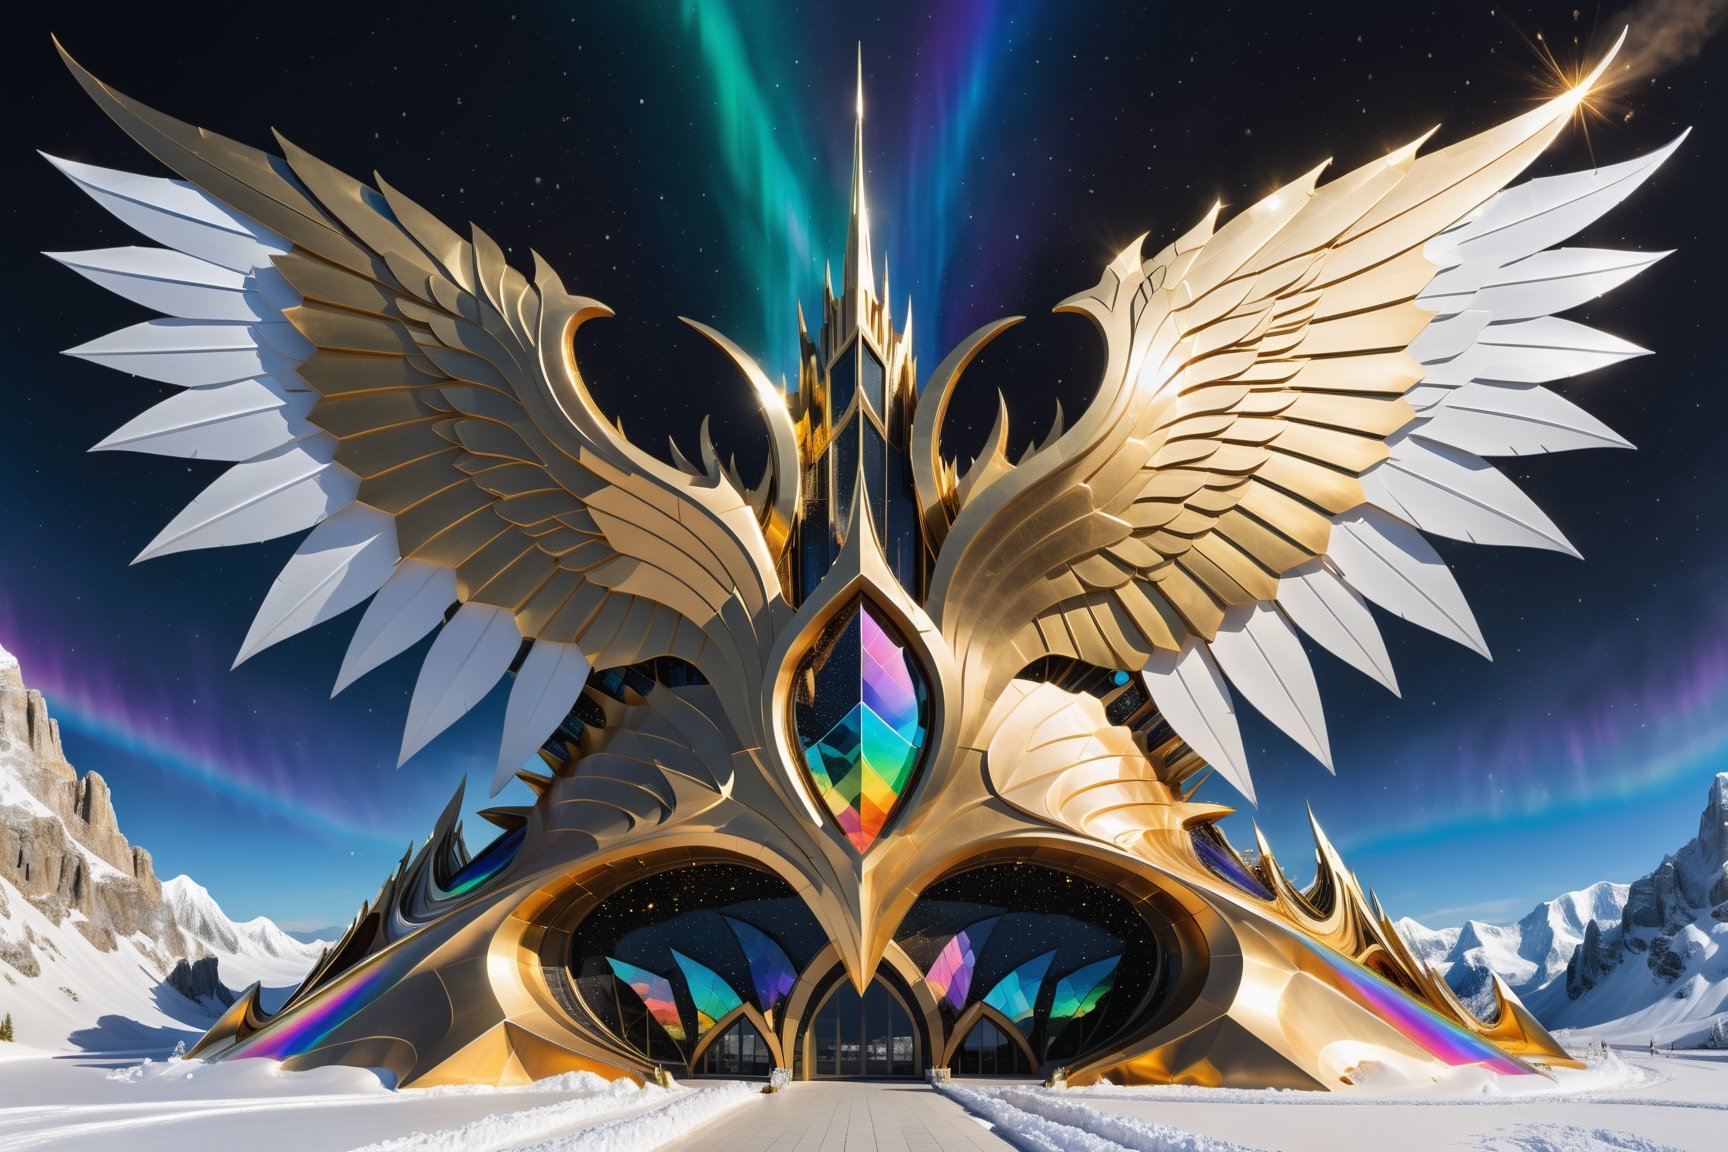 mega sculpture in the form of a hypersonic casttle with dragon aerodinamic wings con withe feather whit border rainbow swaroski holographic caotic, sky rainbow and aurora borealis, snow particles,  metal gold iridicente, inmerse fantary crhistimas snow mountains, boreal colors,  white,  black cosmic explosion,  surreal concept,  very sculptural and with fluid and organic shapes,  with symmetrical curves. Inspired by Zaha Hadid's style,  gold,  with black and white details. The design is inspired by the Tomorrowland 2022 main stage,  with ultra-realistic Art Deco details and a high level of image complexity, articles simetric holographic foil crystal of a luxury shield with wing, caotic diamonds background